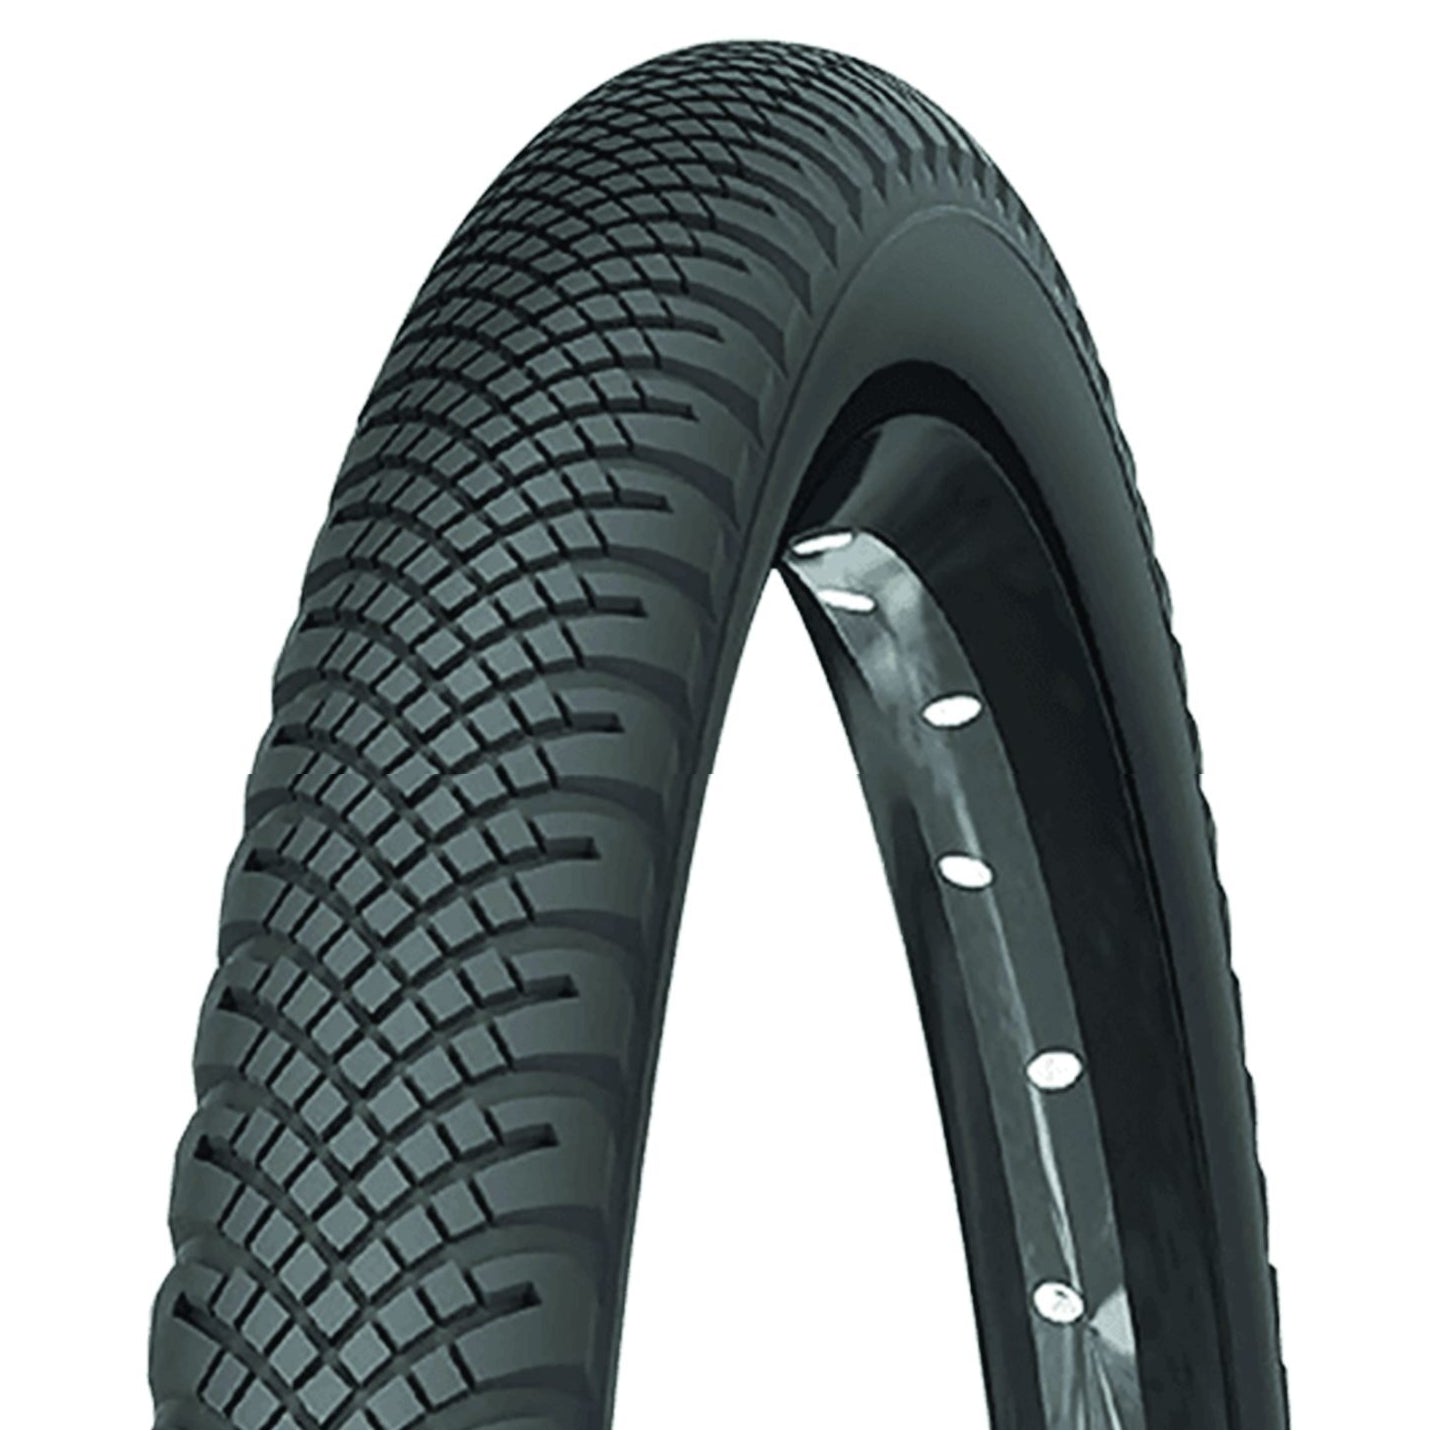 Michelin Country Rock 26x1.75 Tire